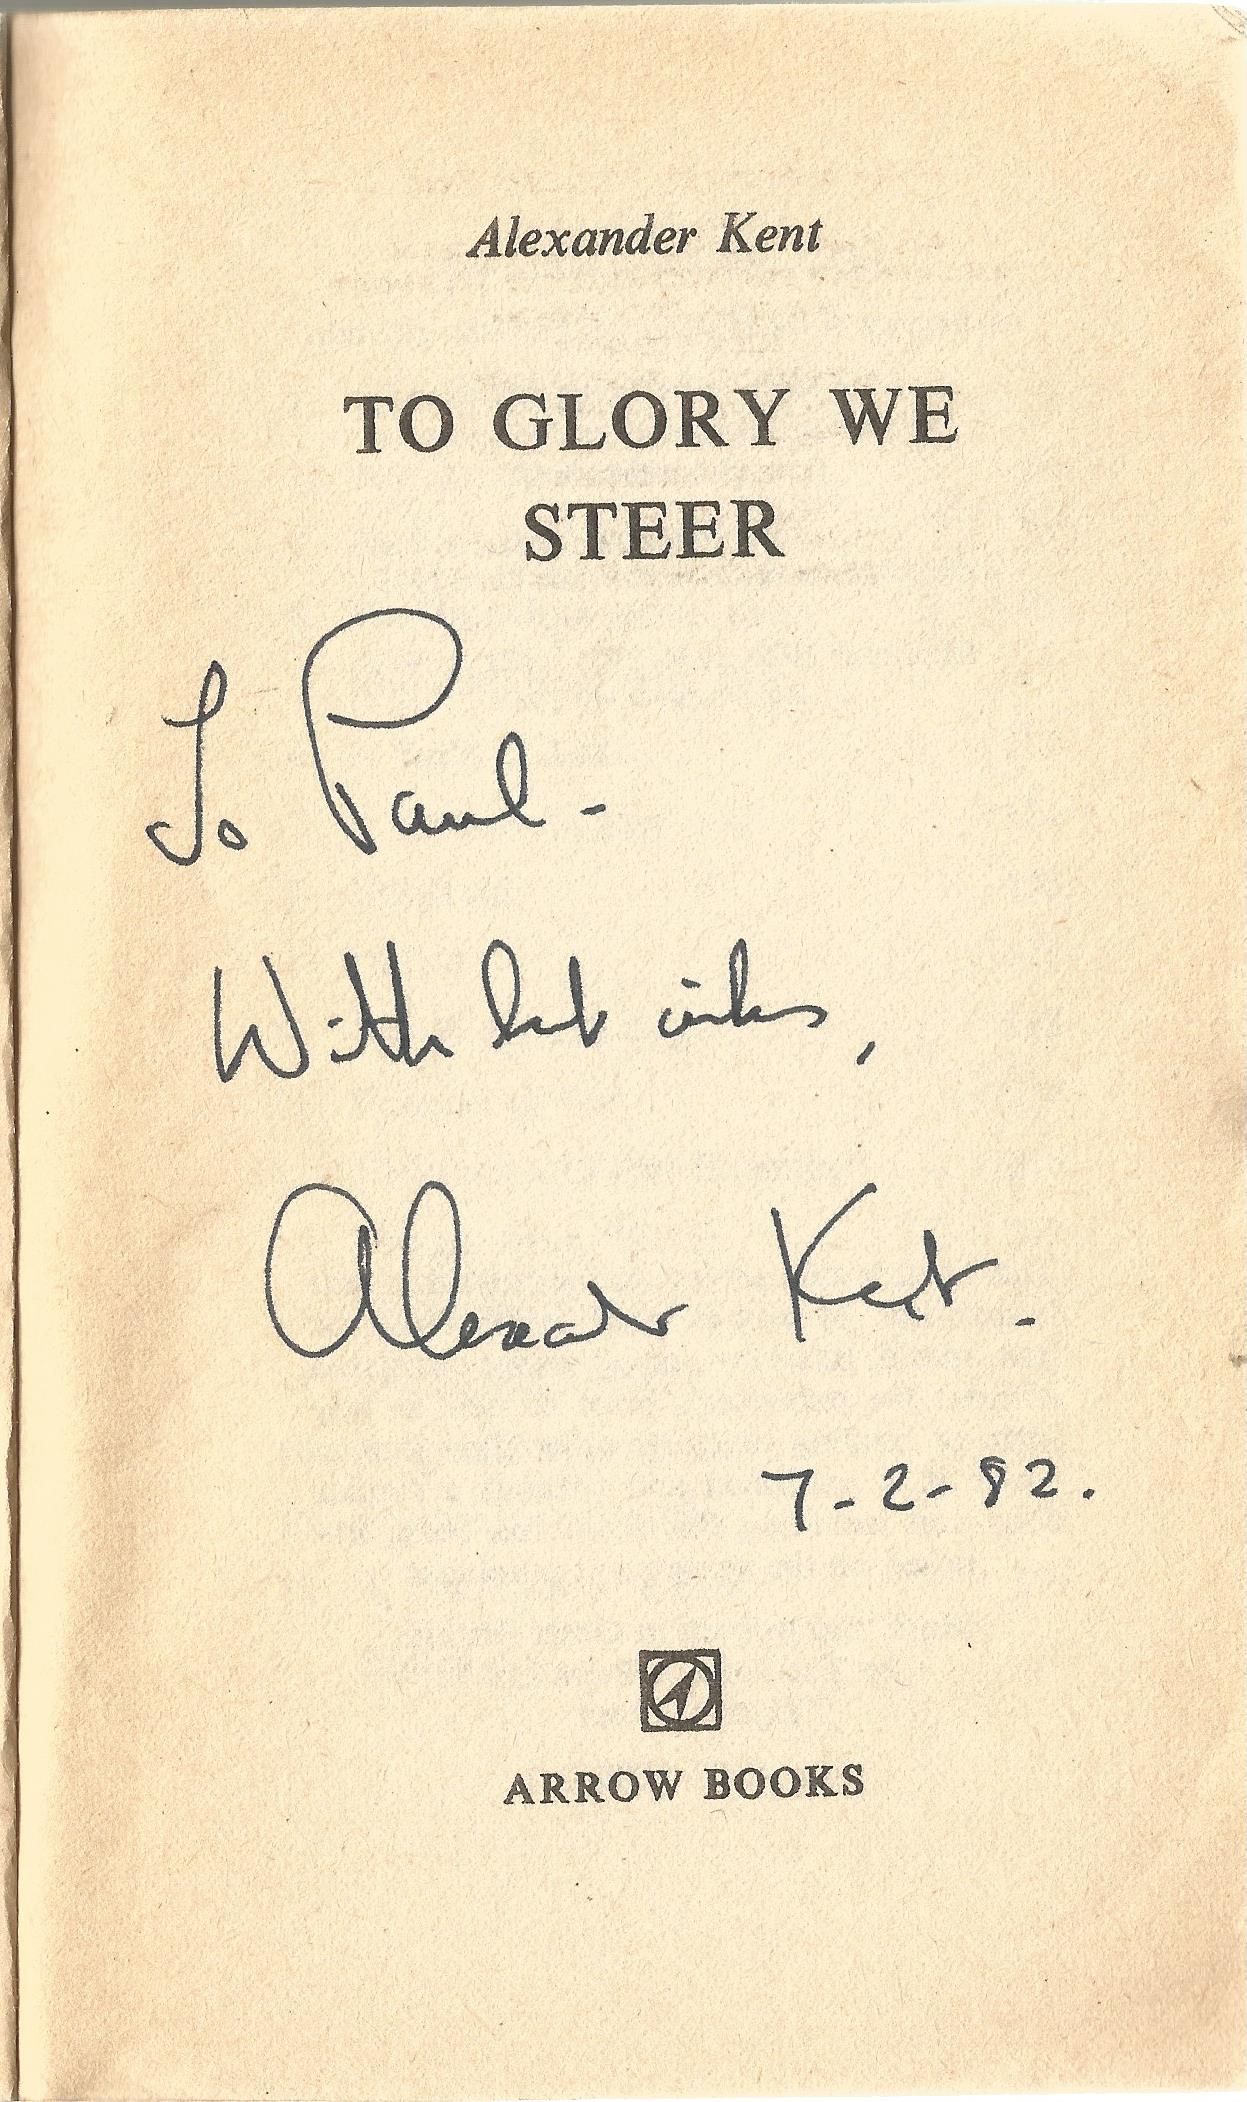 Alexander Kent Paperback Book To Glory We Steer signed by the Author on the Title Page some minor - Image 2 of 2